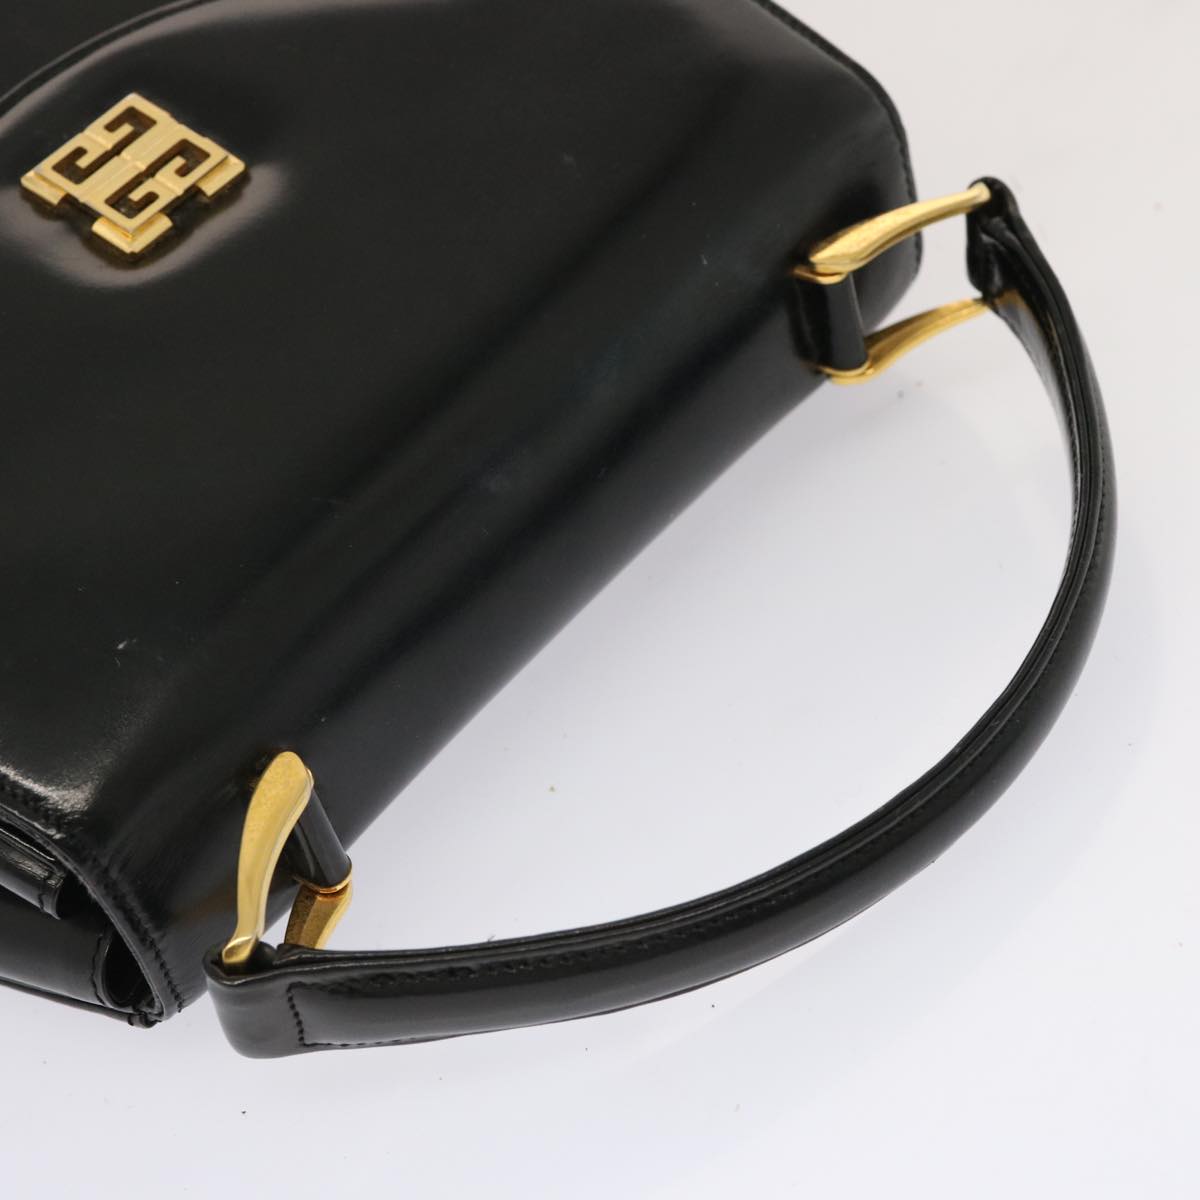 GIVENCHY Hand Bag Patent leather Black Auth 72756